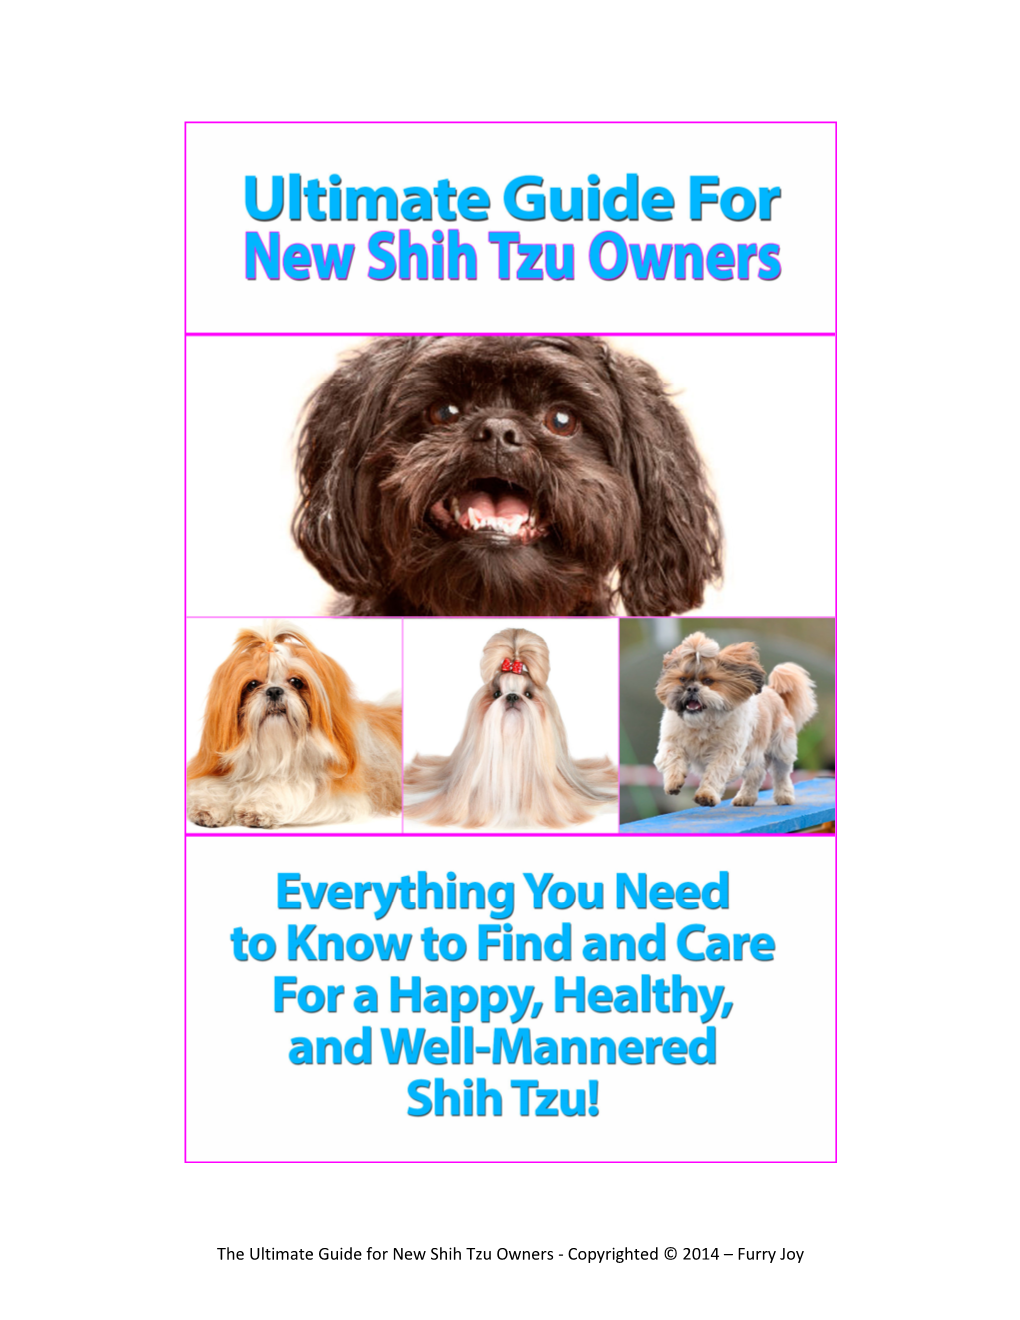 The Ultimate Guide for New Shih Tzu Owners - Copyrighted © 2014 – Furry Joy 2